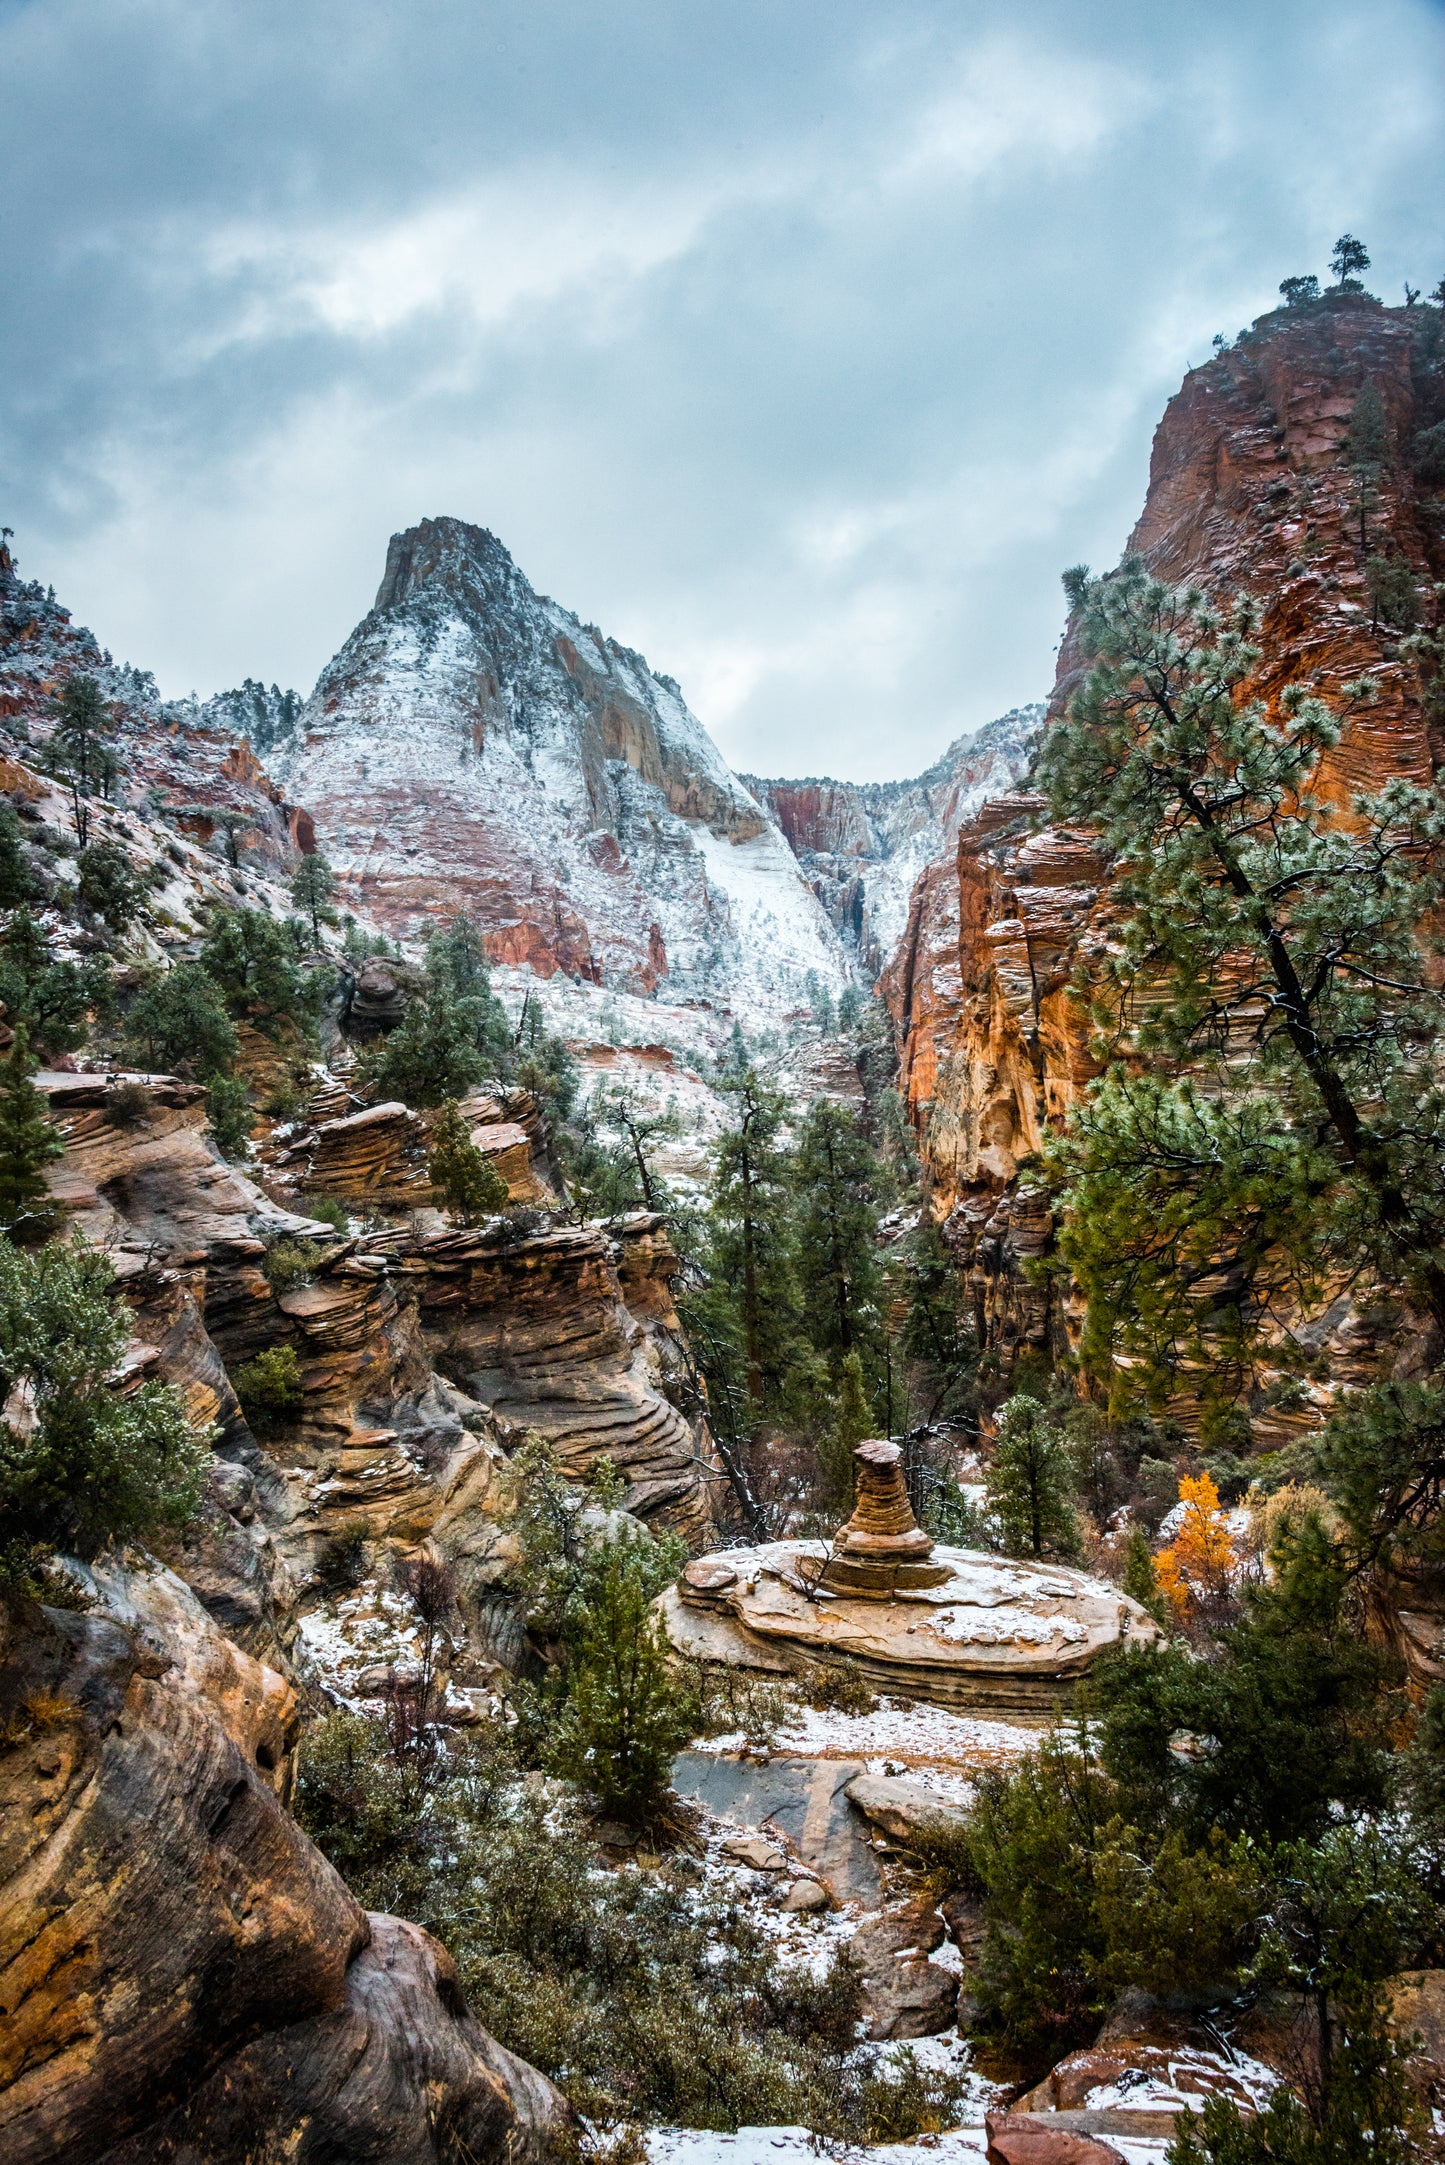 The most amazing scene of Zion National Park I have ever experienced. The first snow of the season. The colors explode fiery on the wet Zion walls. Zion sees so few storms a year, the snowy scene is quite a rare treat.